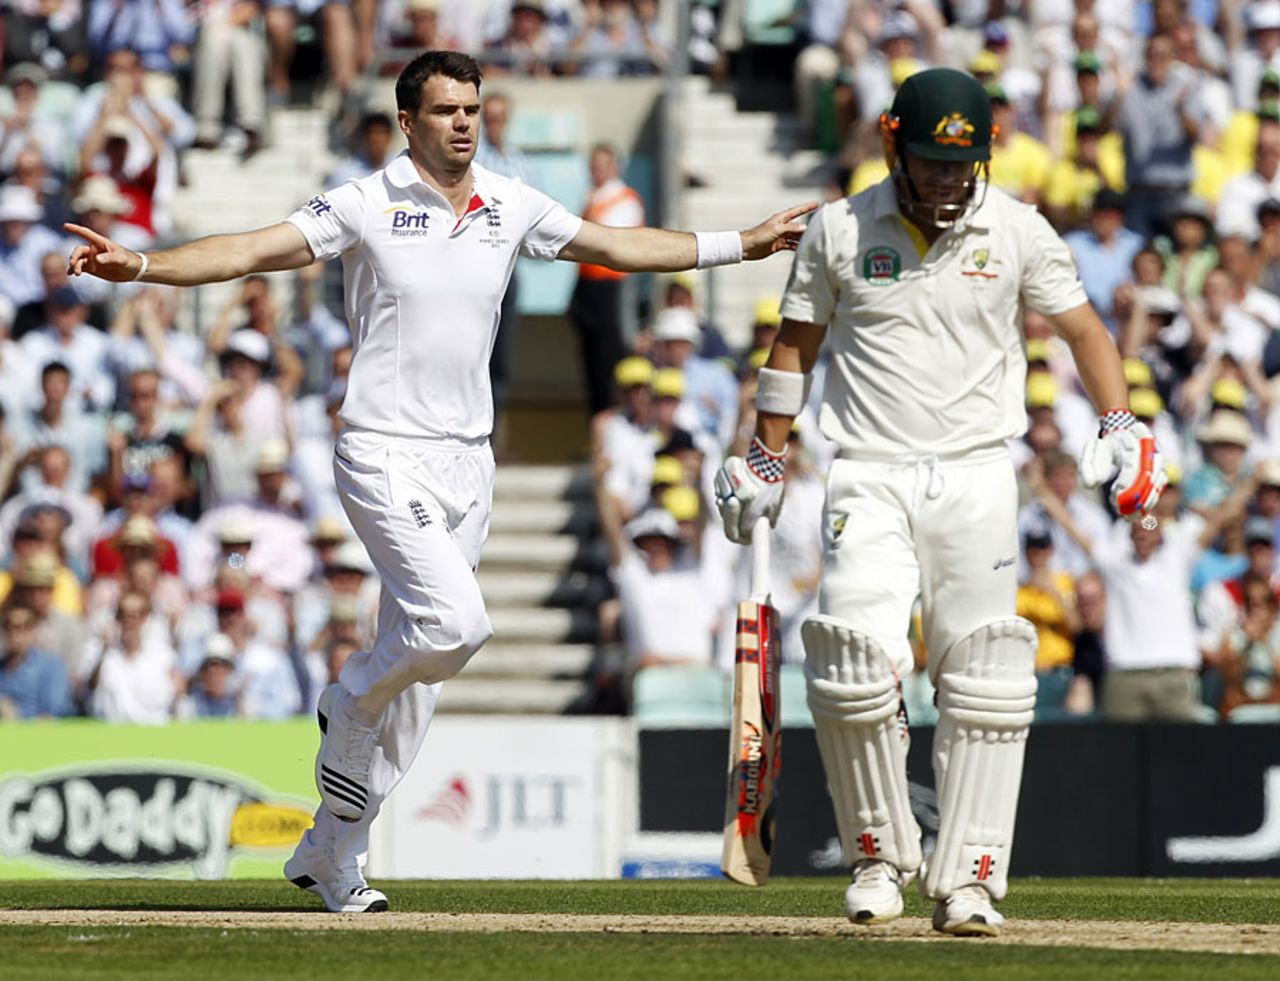 James Anderson removed David Warner early in the day, England v Australia, 5th Investec Test, The Oval, 1st day, August 21, 2013